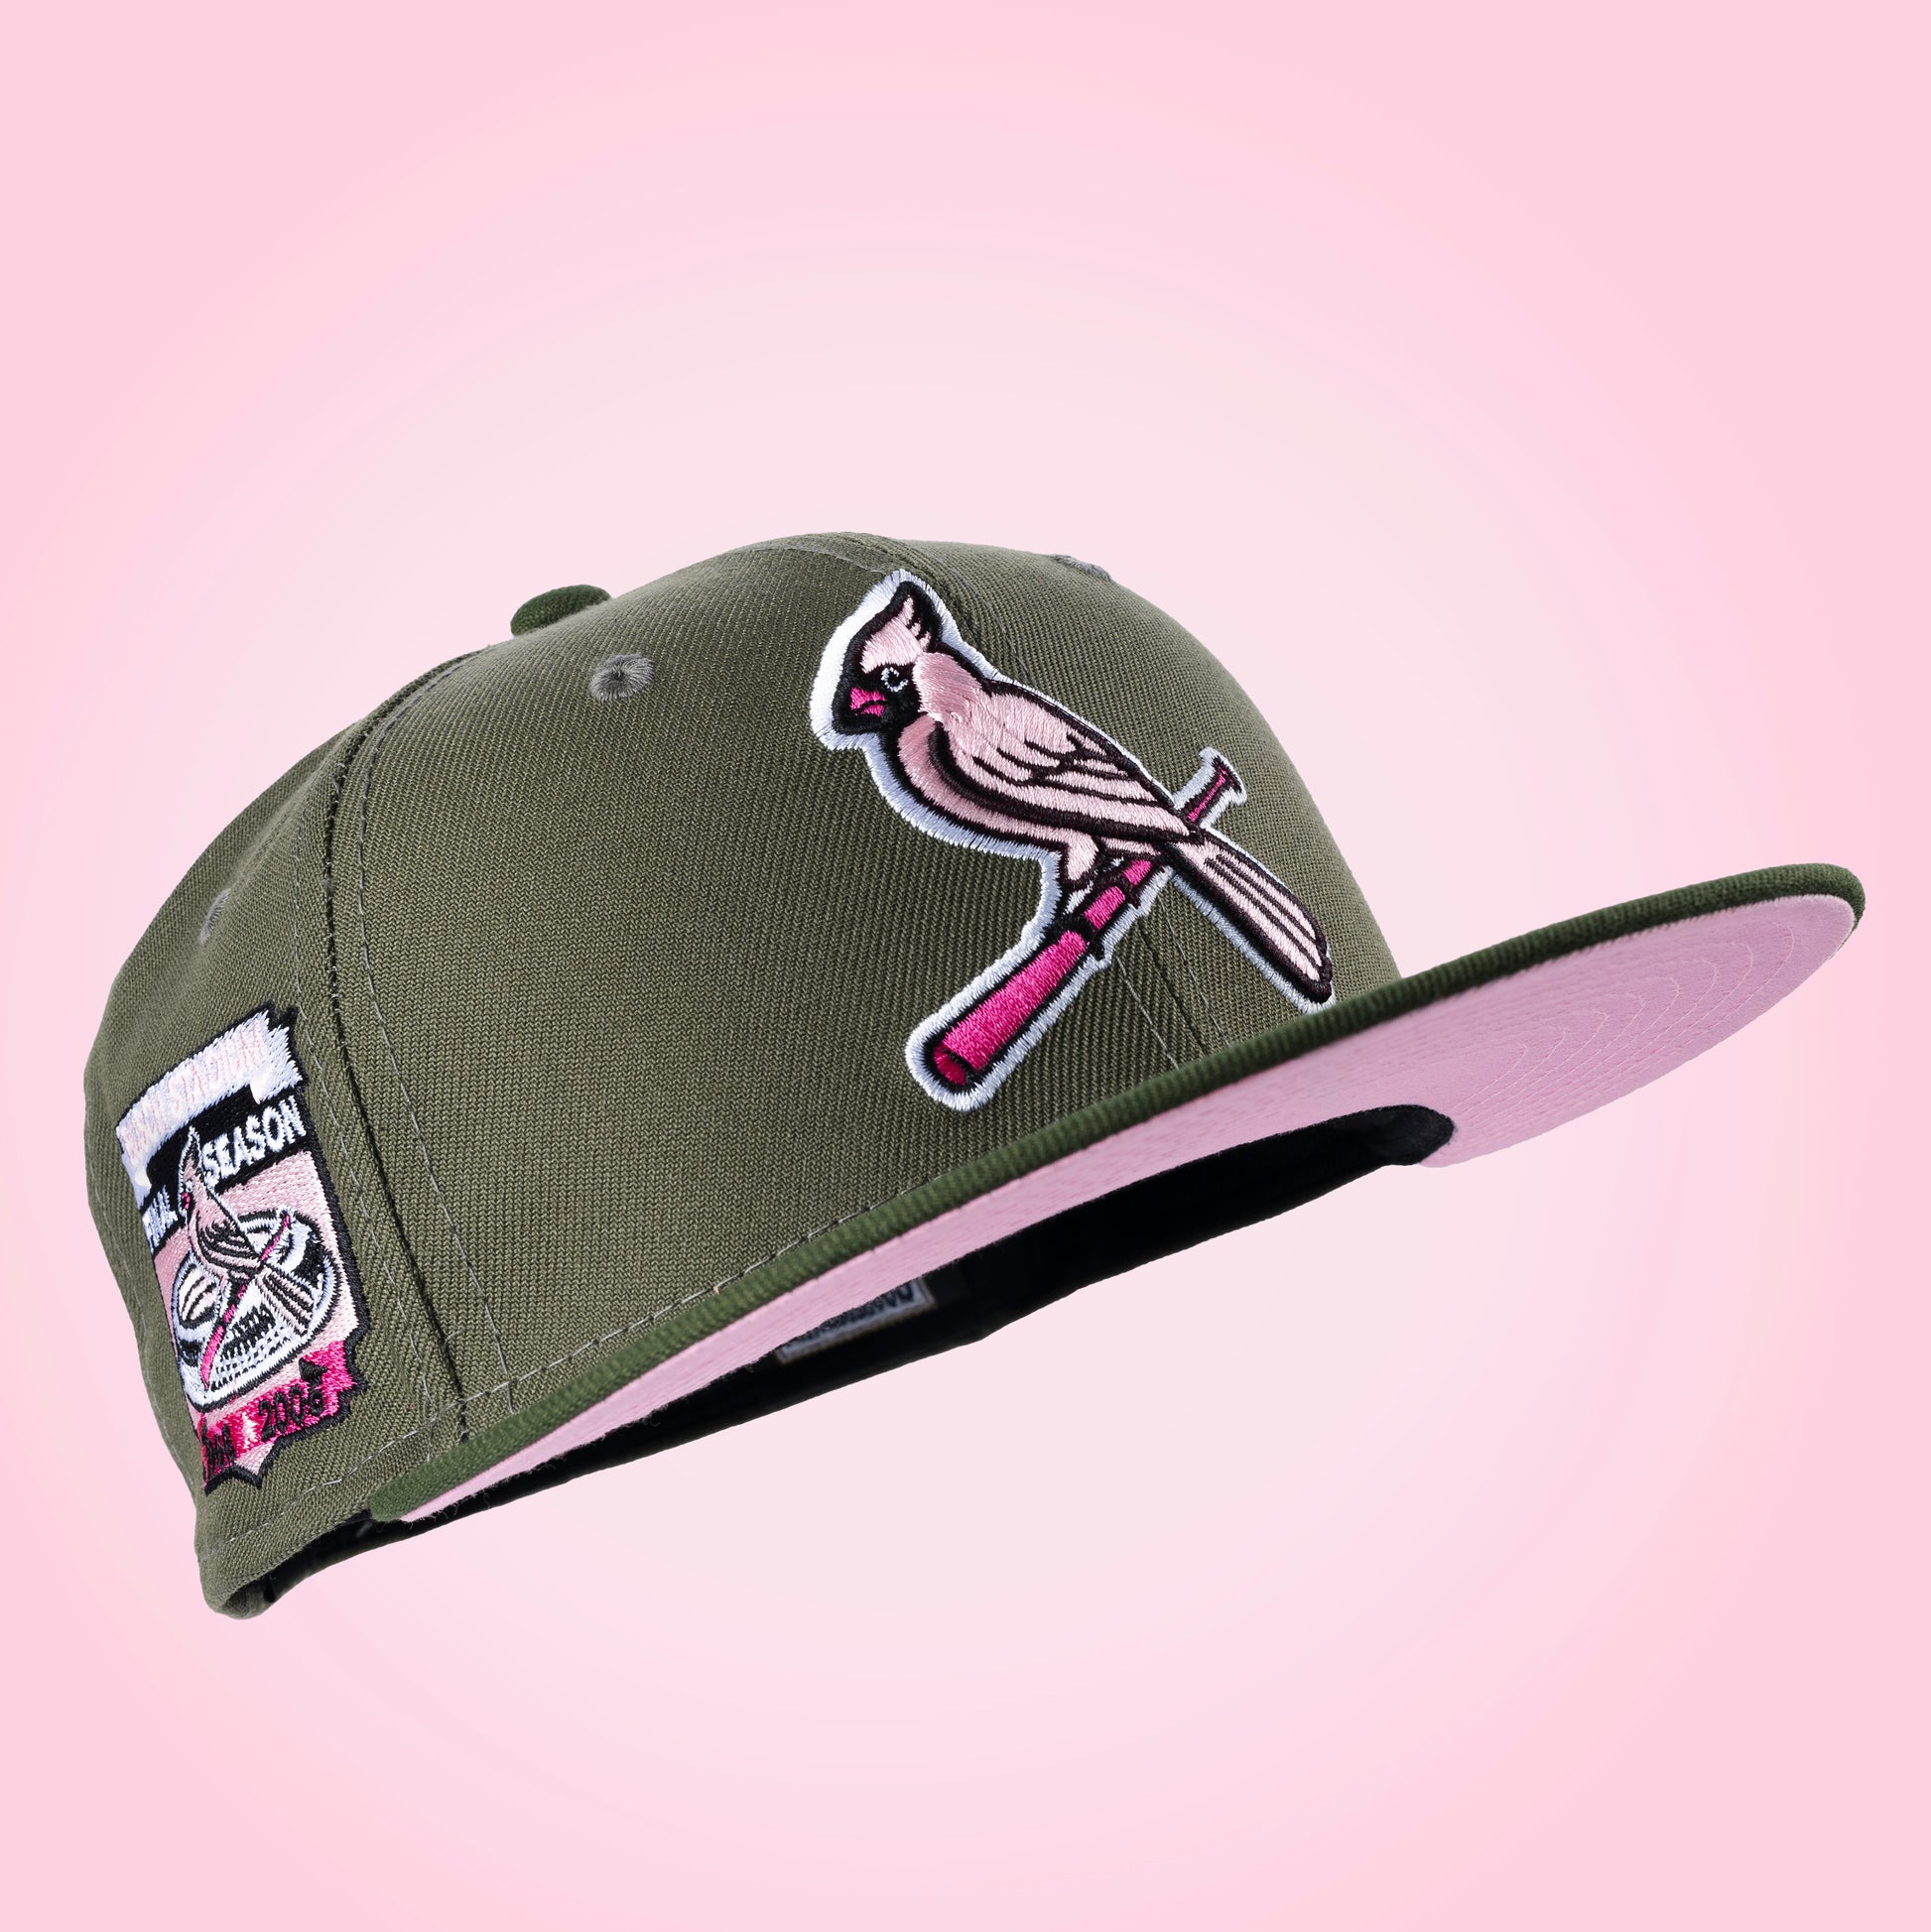 ST.LOUIS CARDINALS PINK OLIVE PACK NEW ERA 59FIFTY HAT – THE DAIRY CLUB